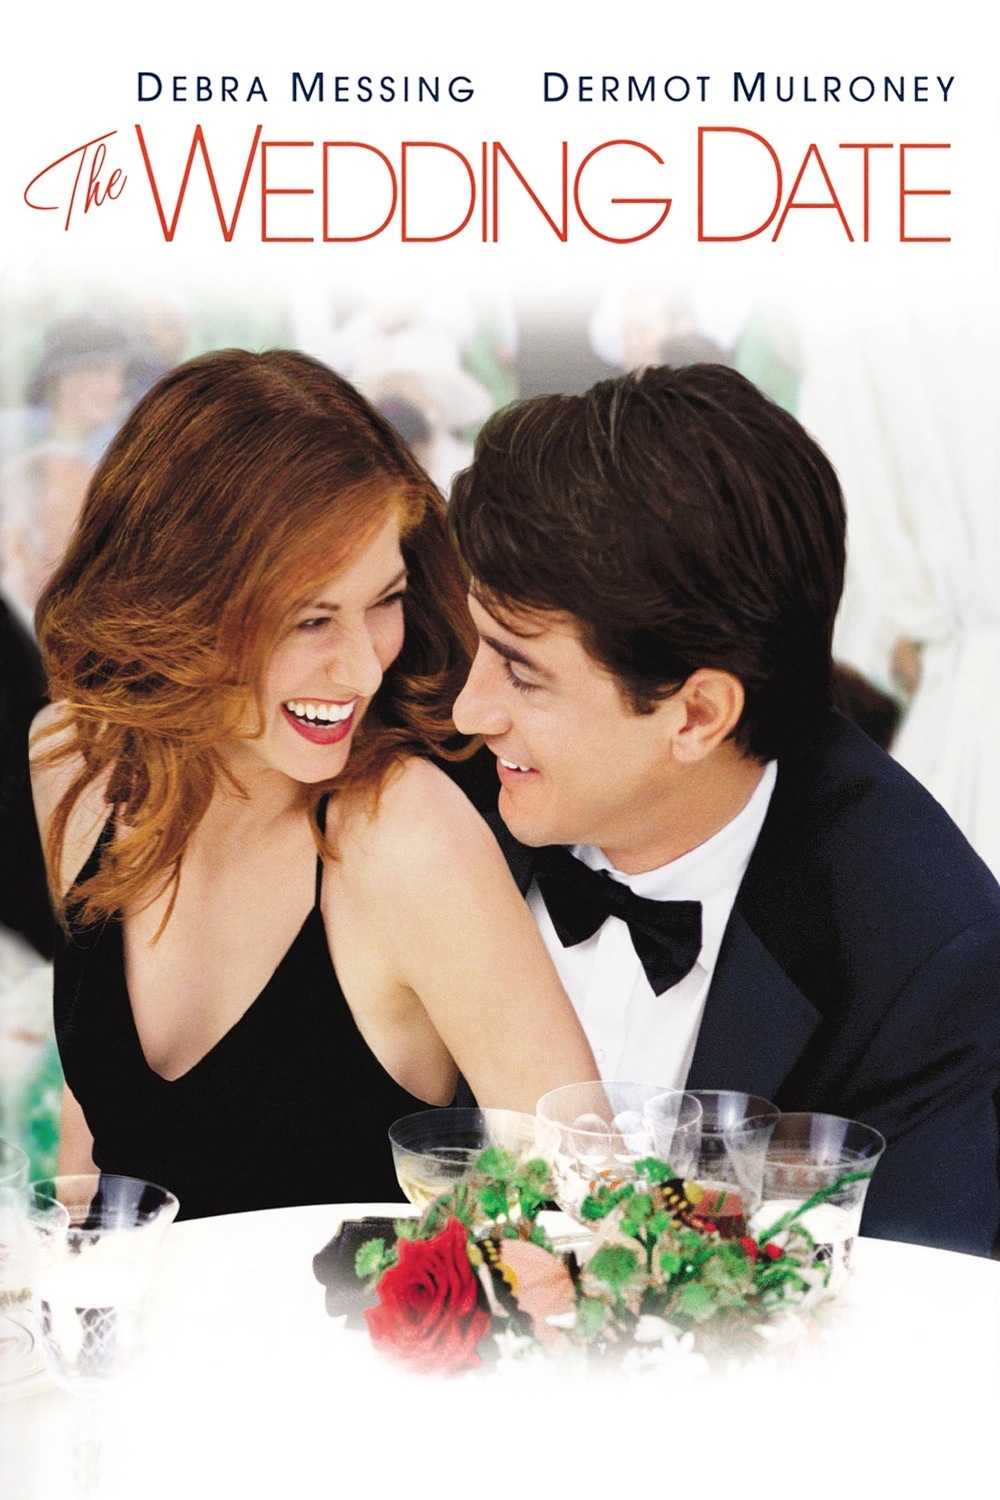 Ten Years Ago: The Wedding Date – 10 Years Ago: Films in 